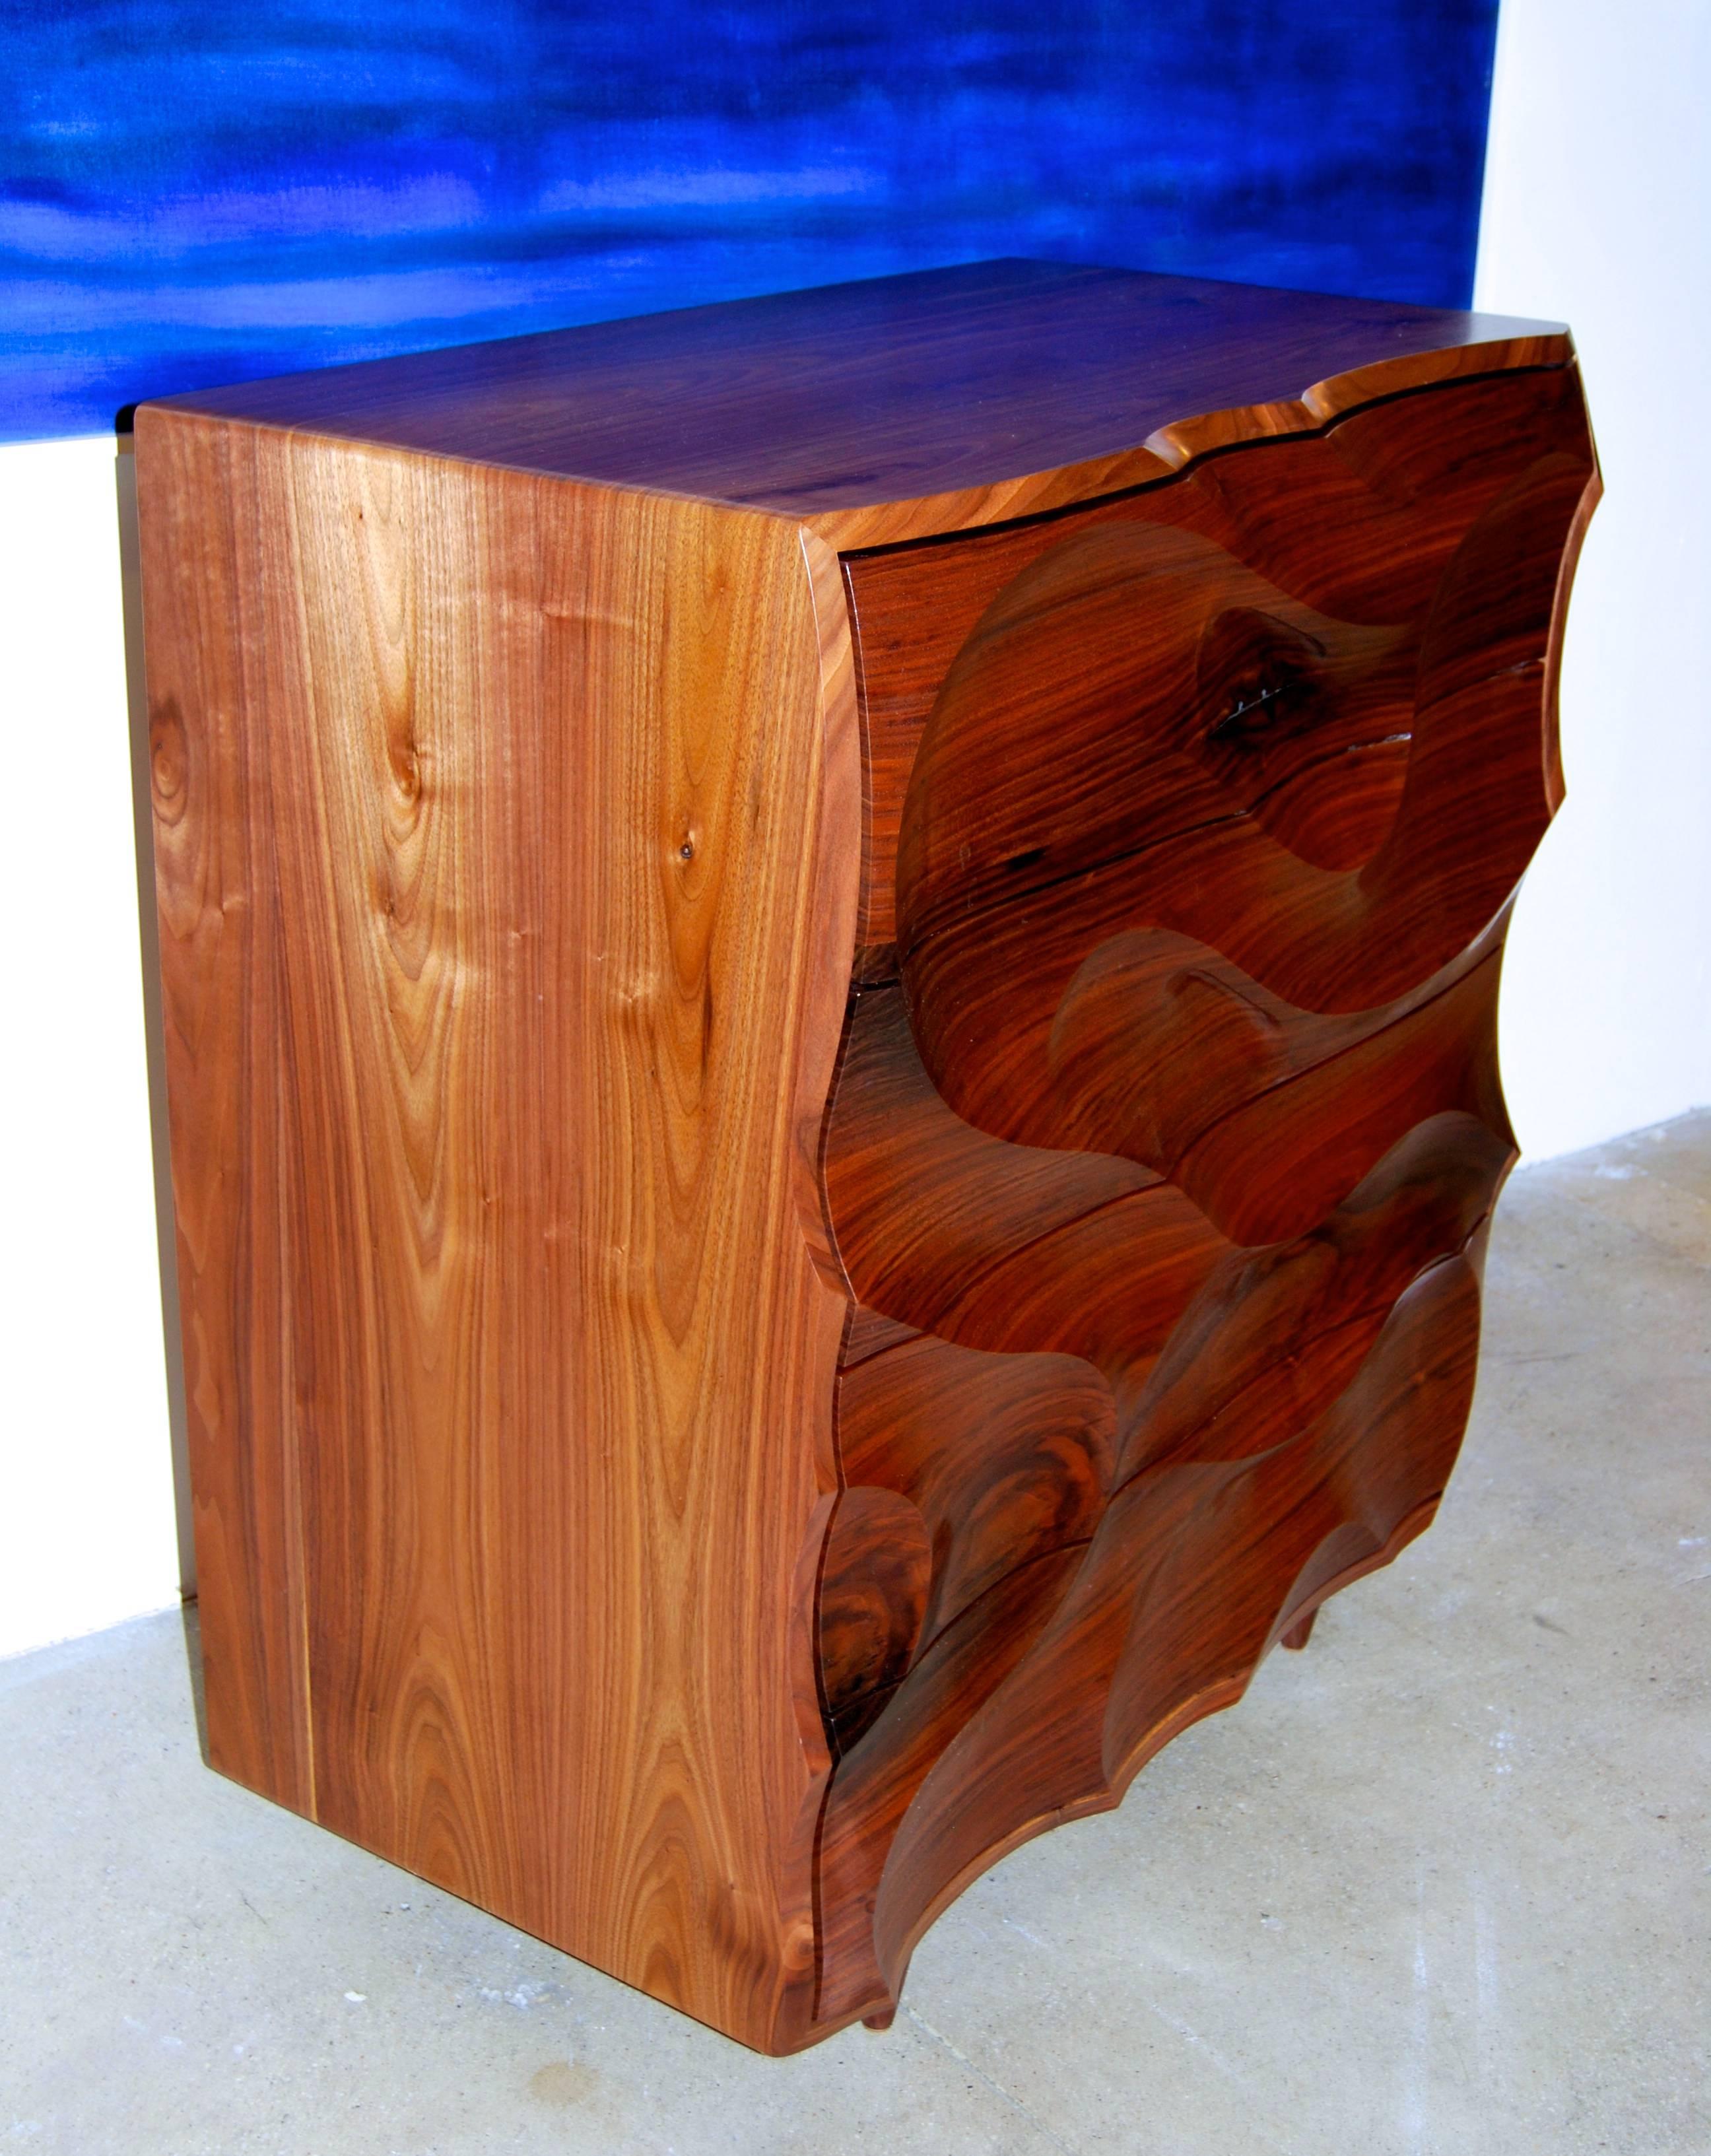 Gentleman's chest or cabinet, hand-carved in solid American black walnut with hand-cut dovetailed drawers in a bookmatched and grain-wrapped case.
Sculpture like quality.
Please inquire if you need to see additional photos.